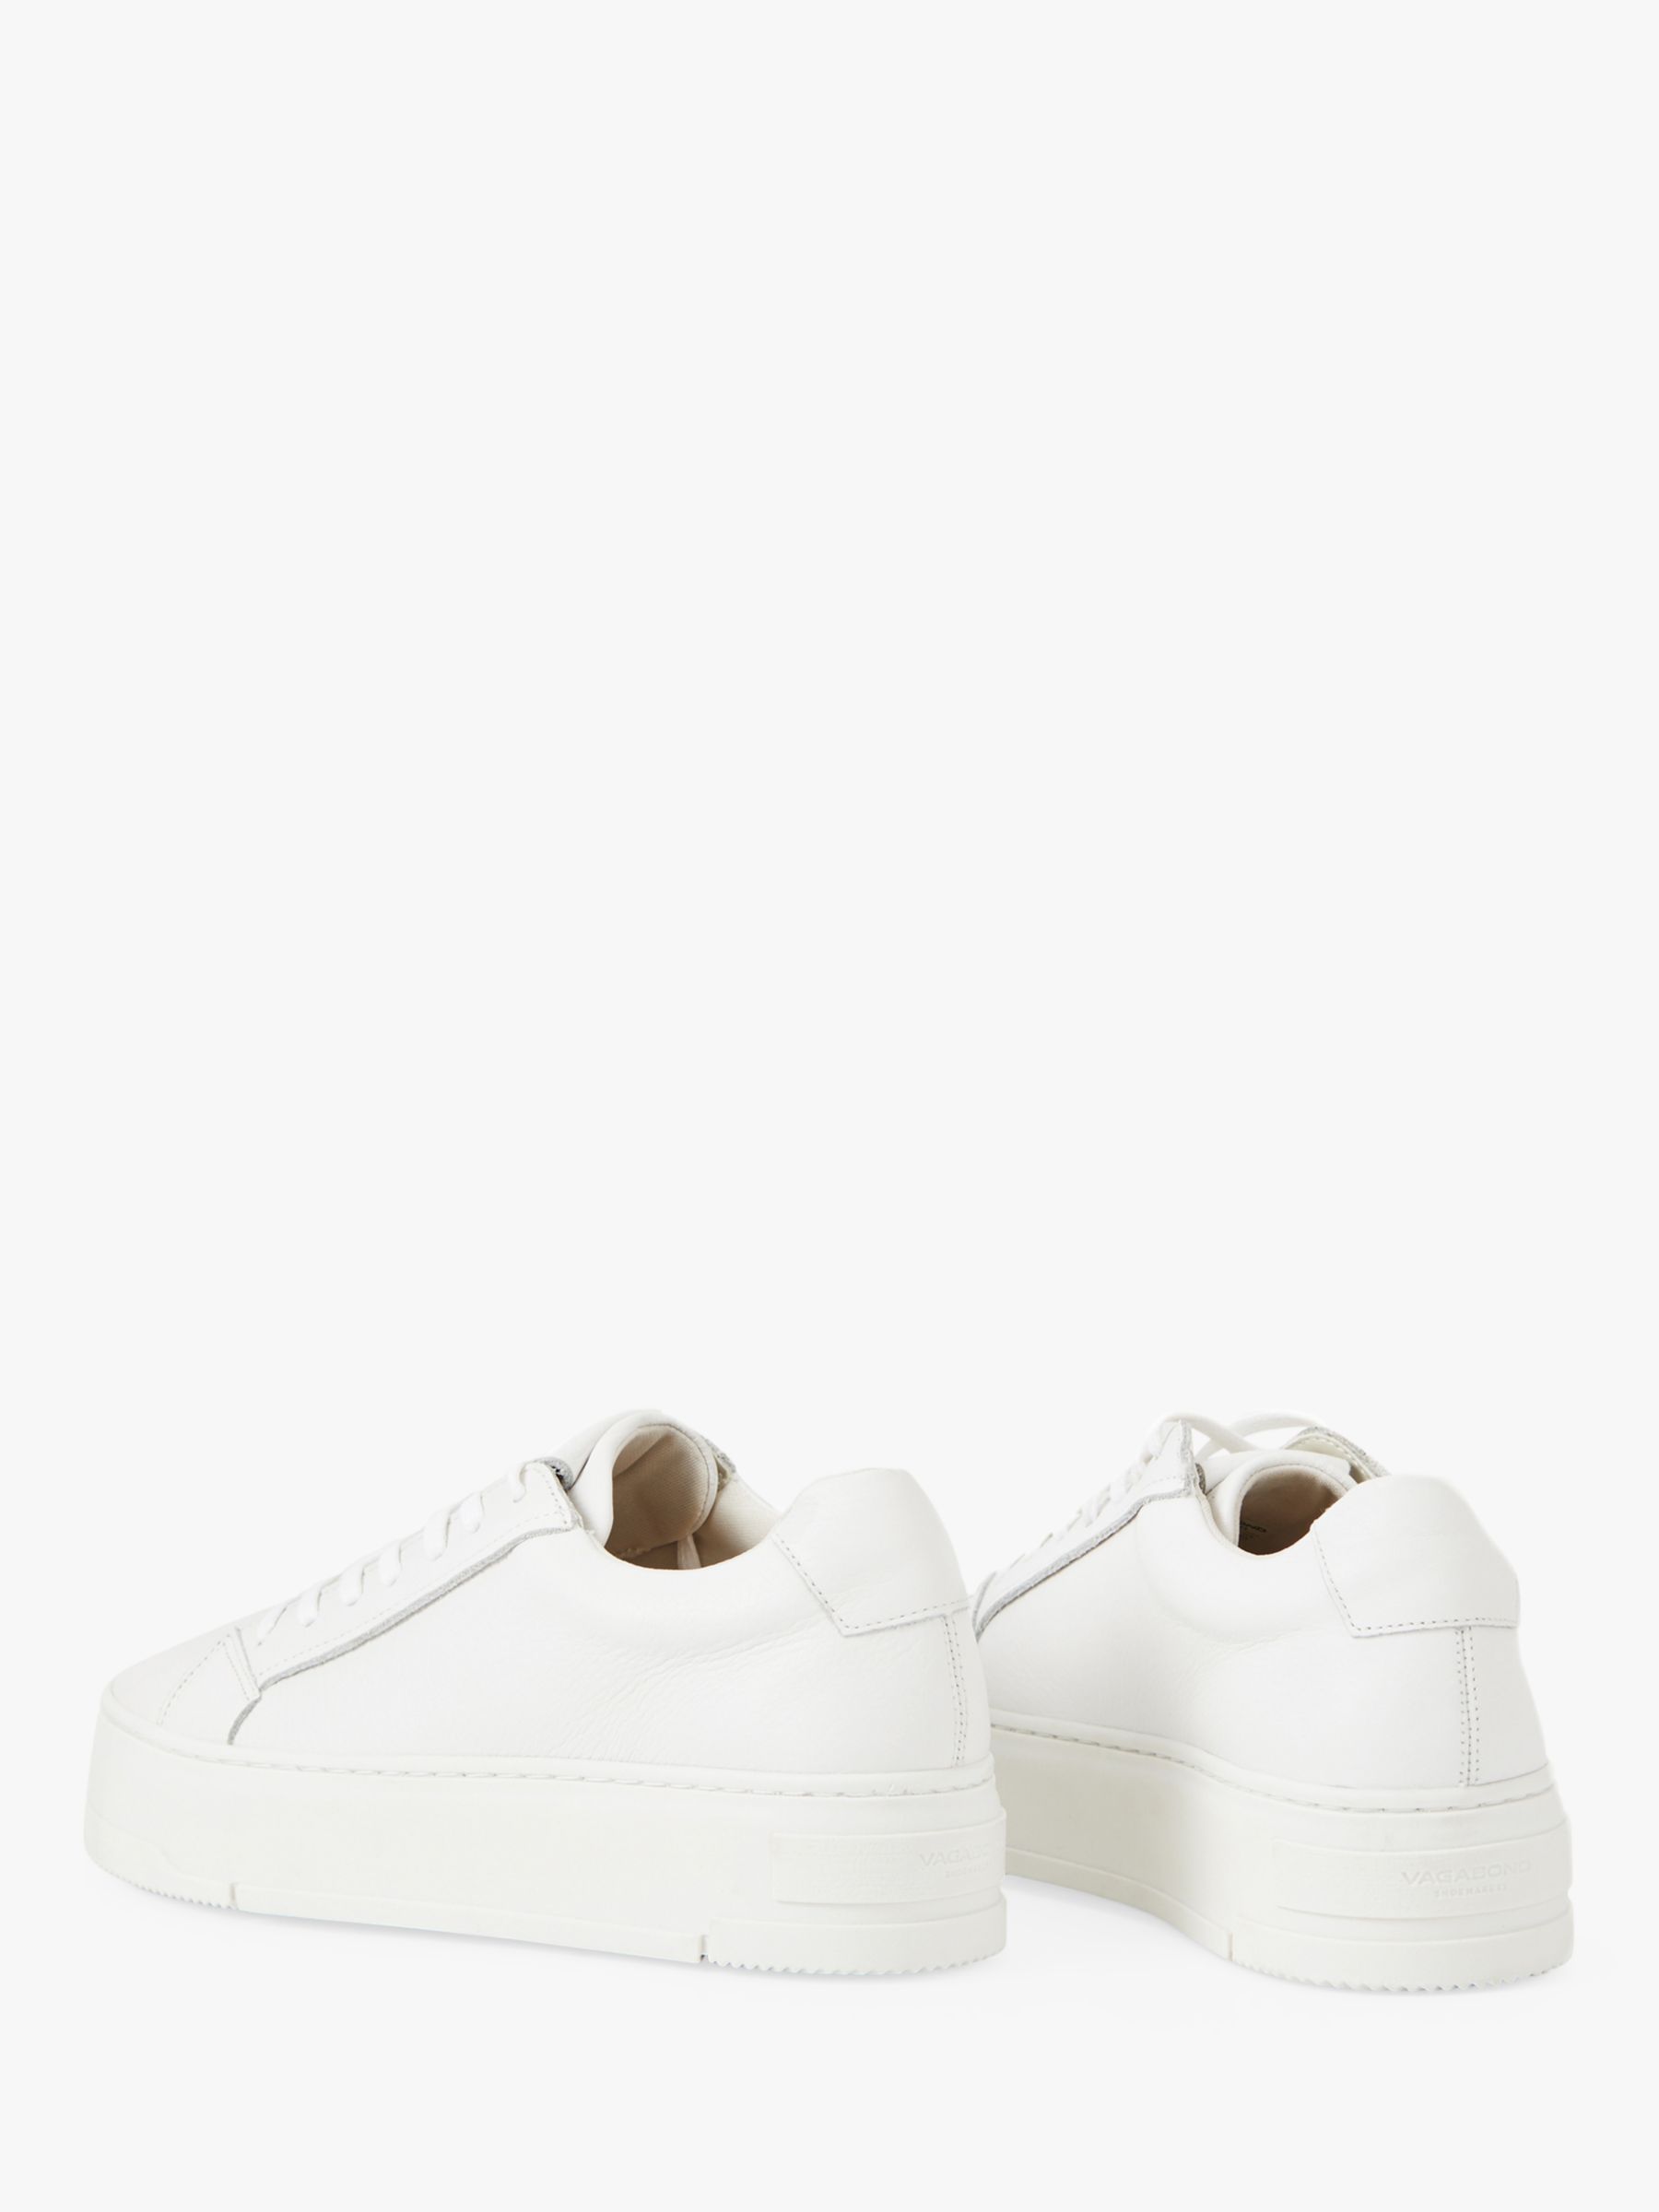 Billy her Gøre klart Vagabond Shoemakers Judy Leather Trainers, White at John Lewis & Partners